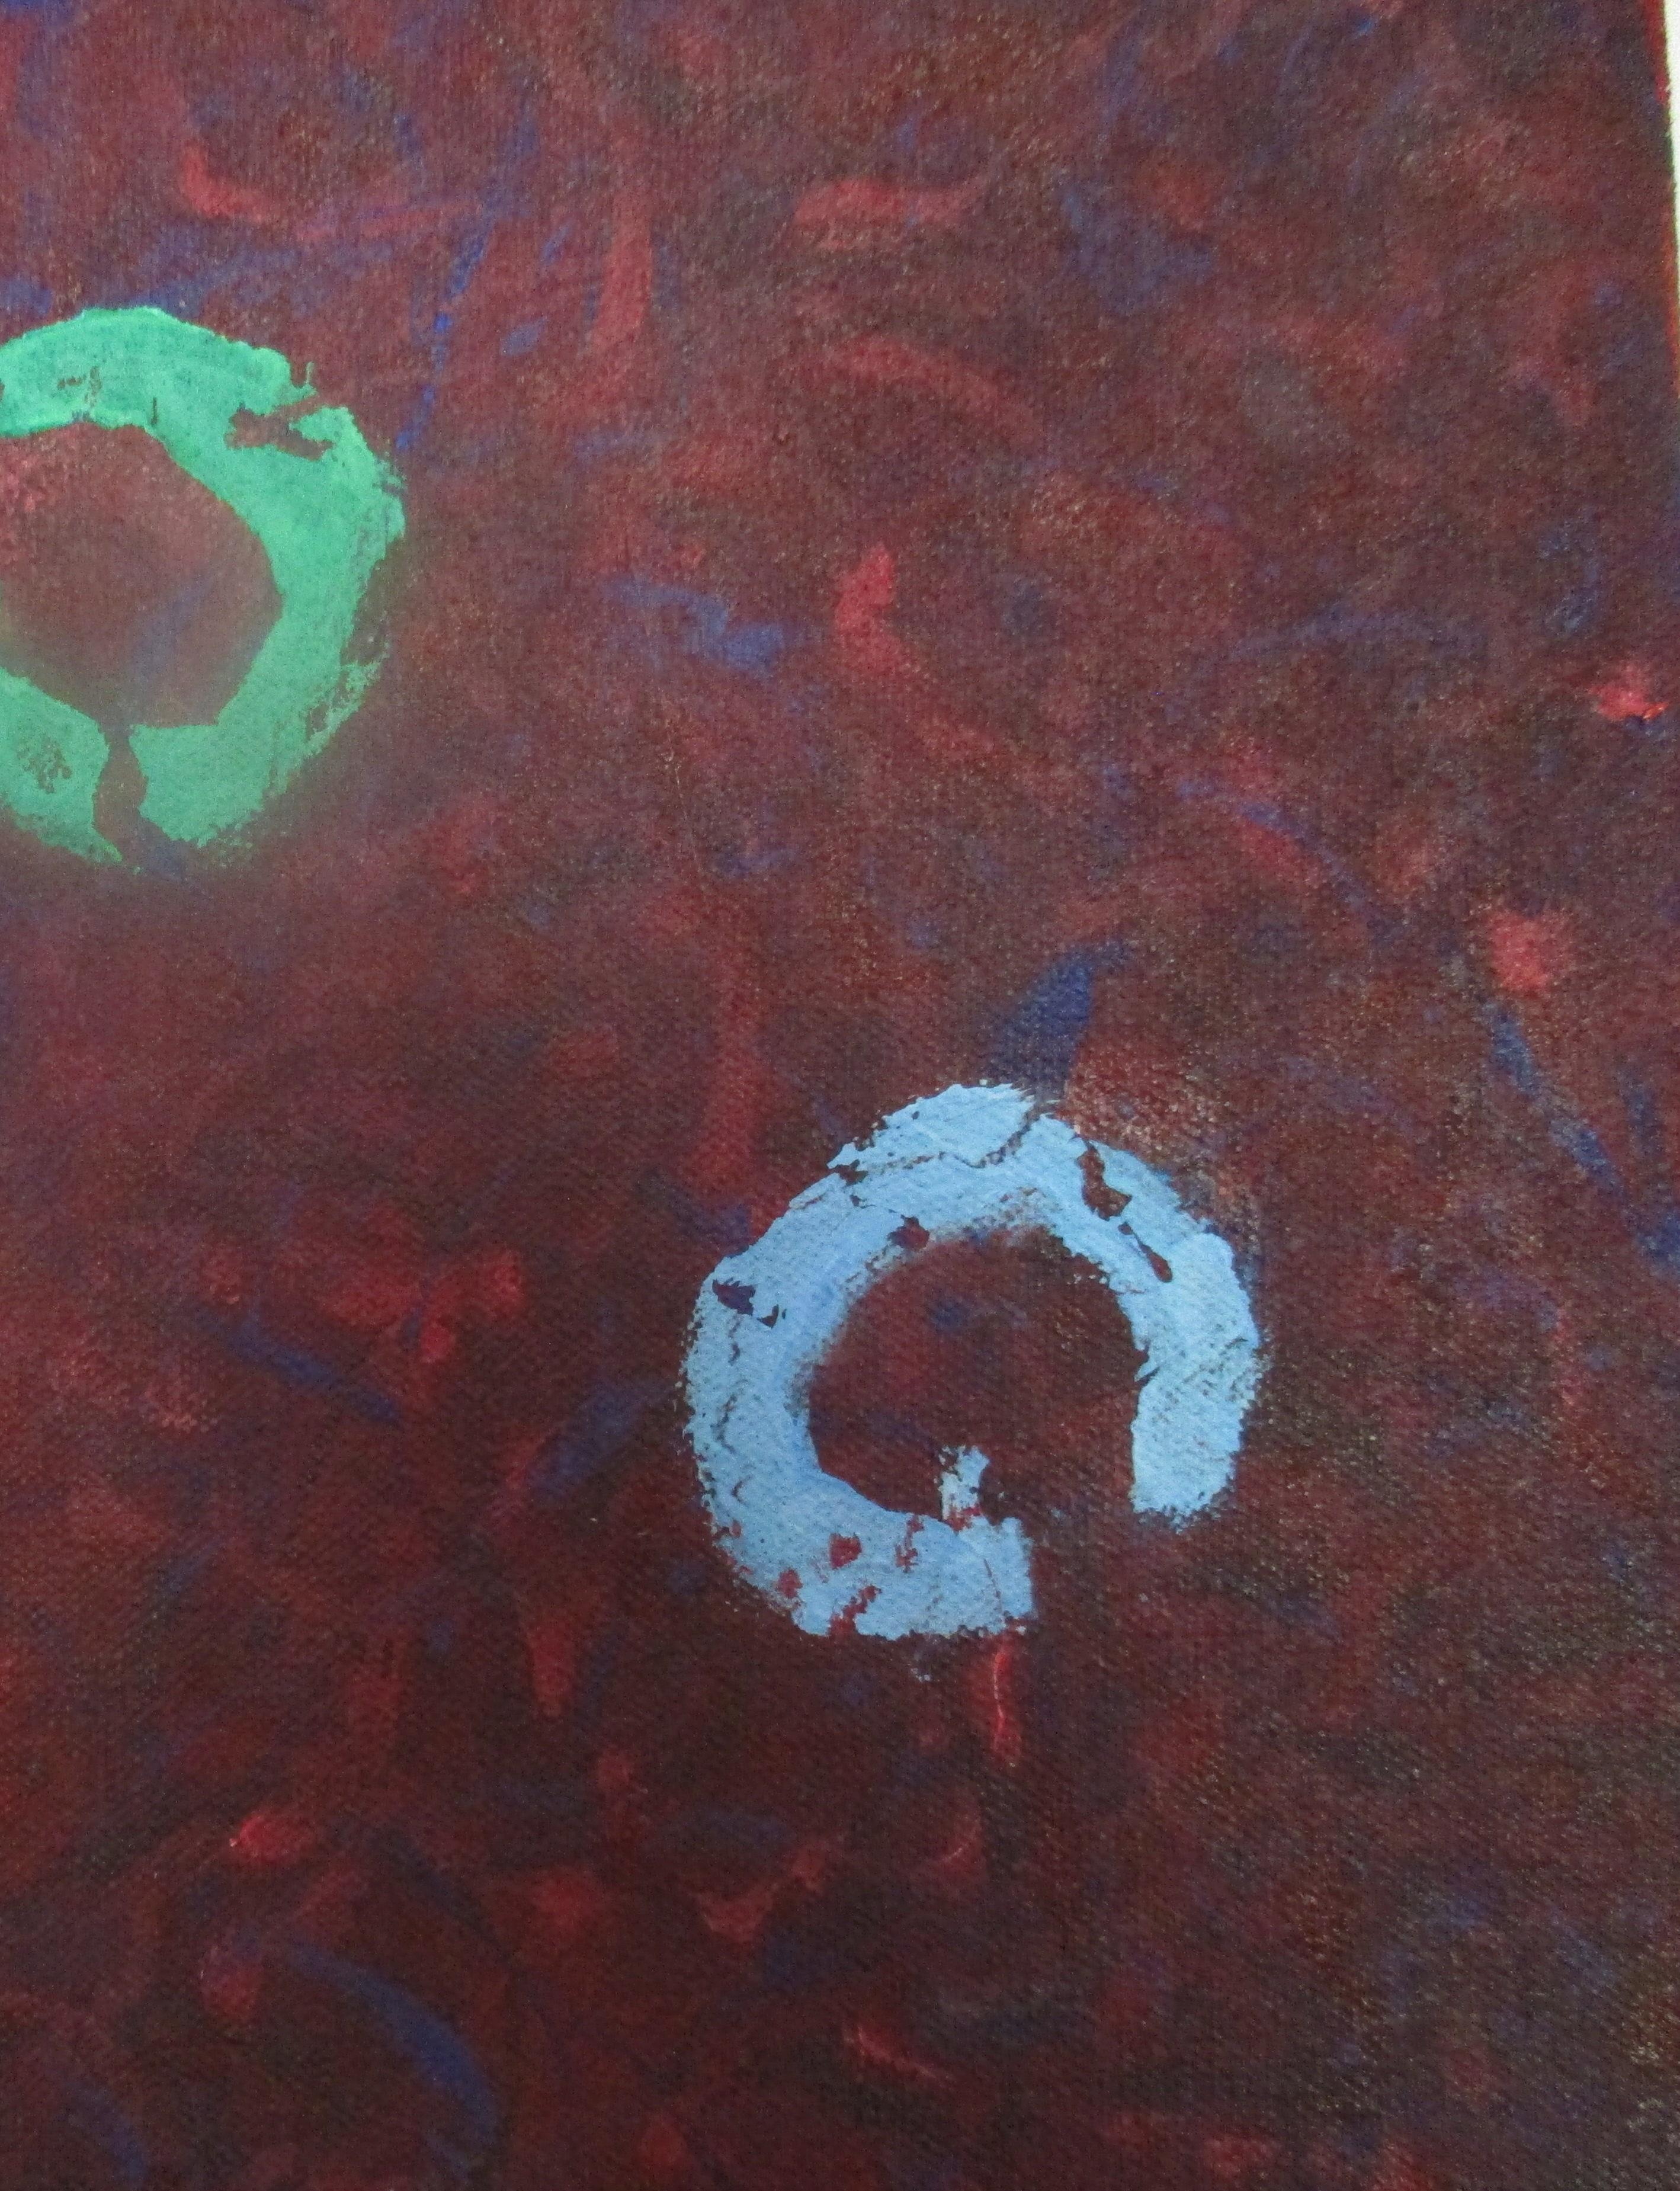 Inspired by Man's Landing on the moon in the 1960s
Acrylic on canvas. Image 18